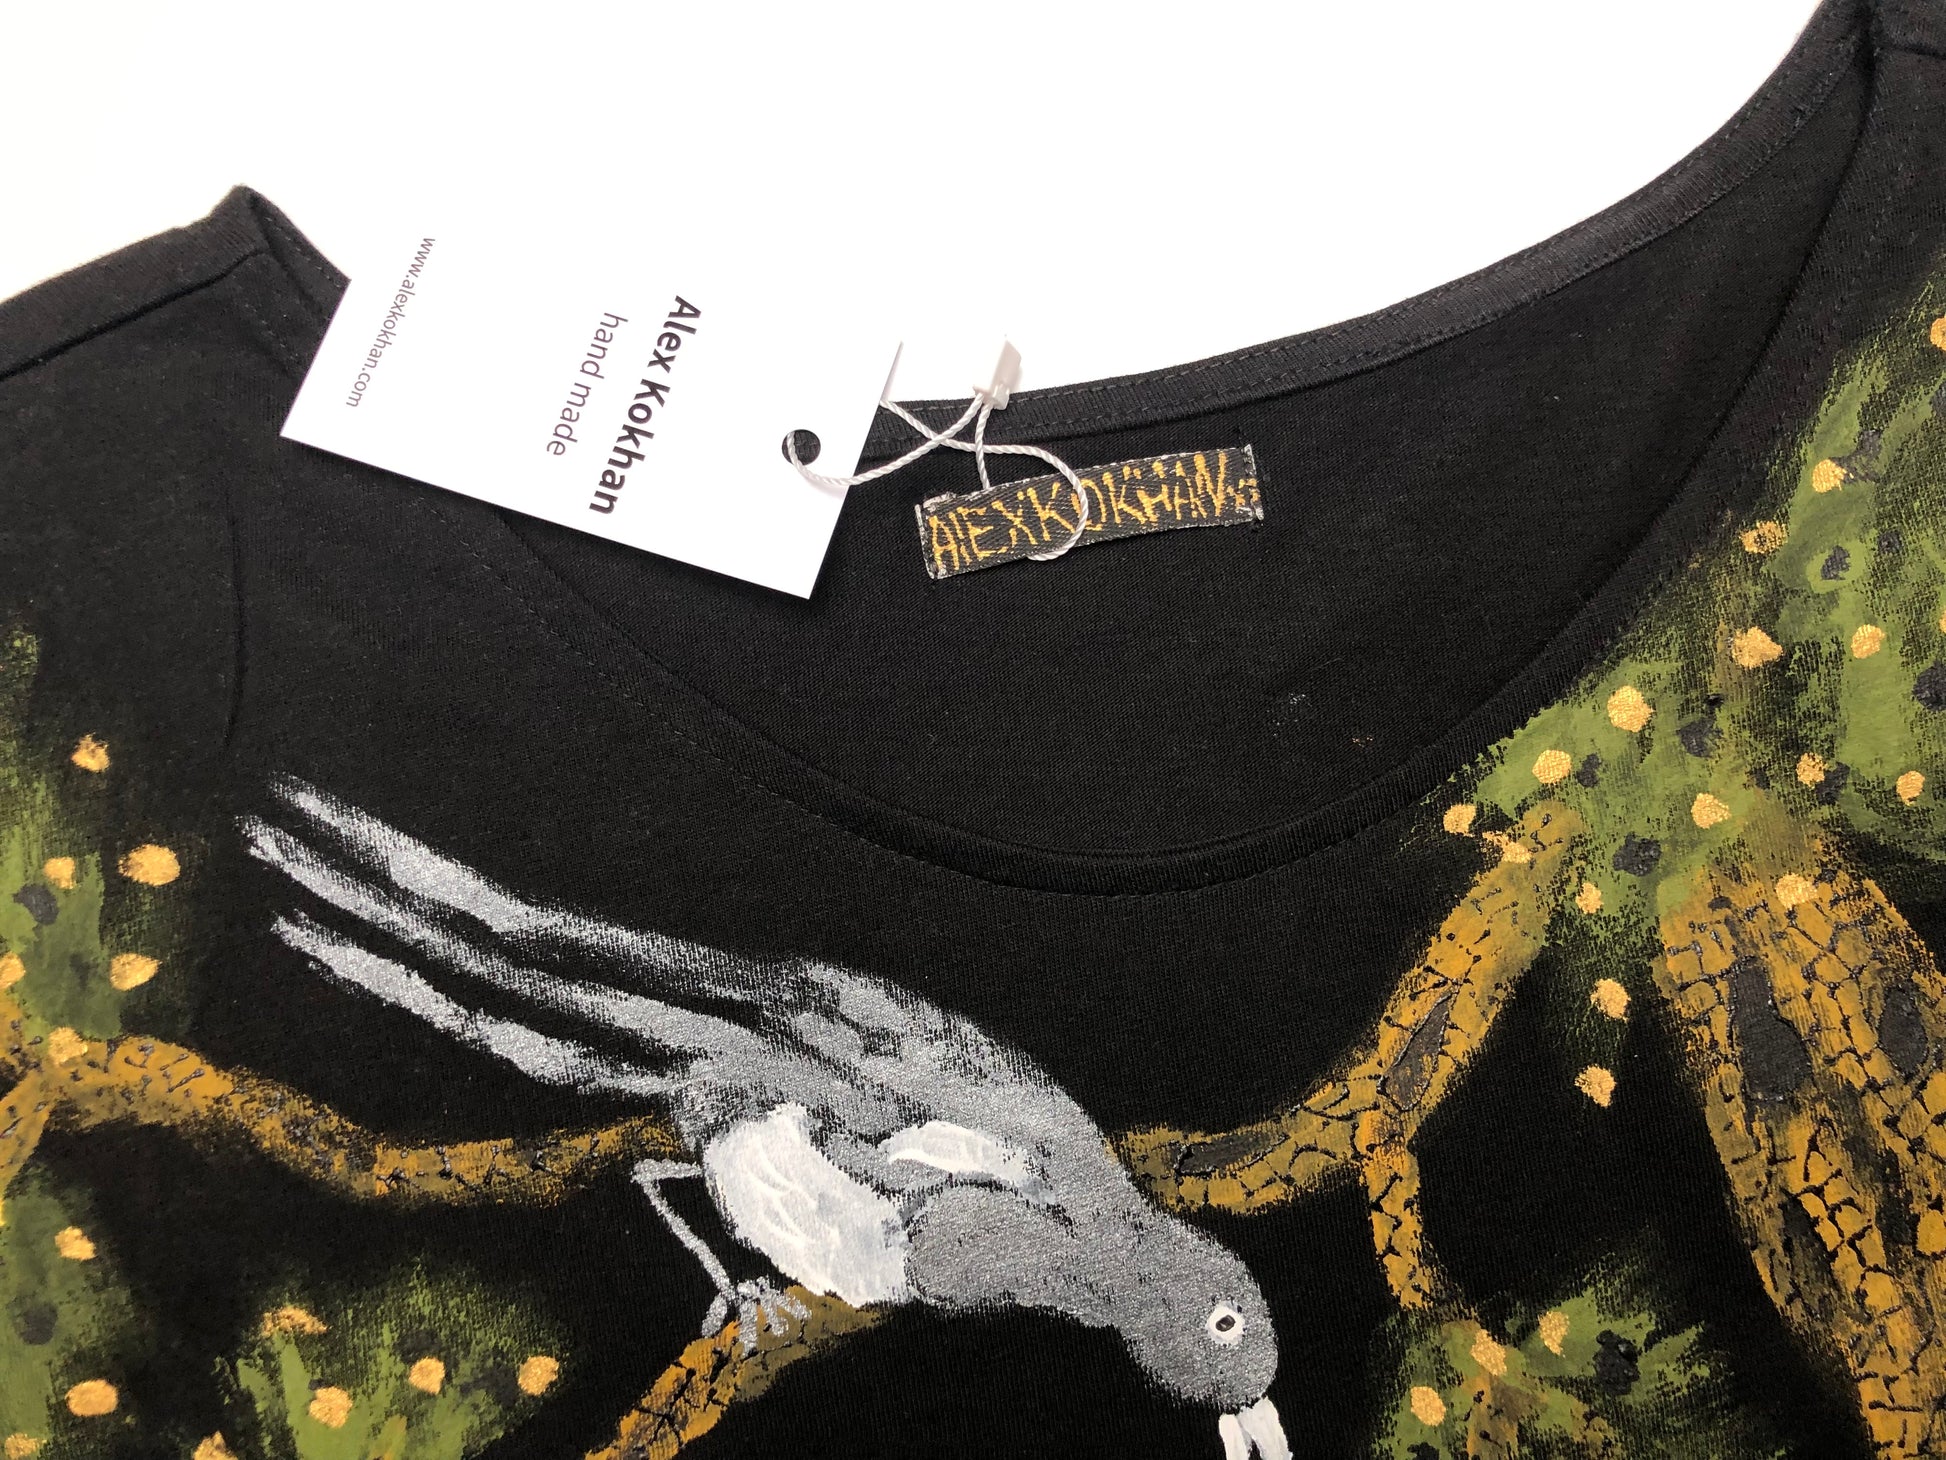 Detailed image of the upper part of the neck of the T-shirt